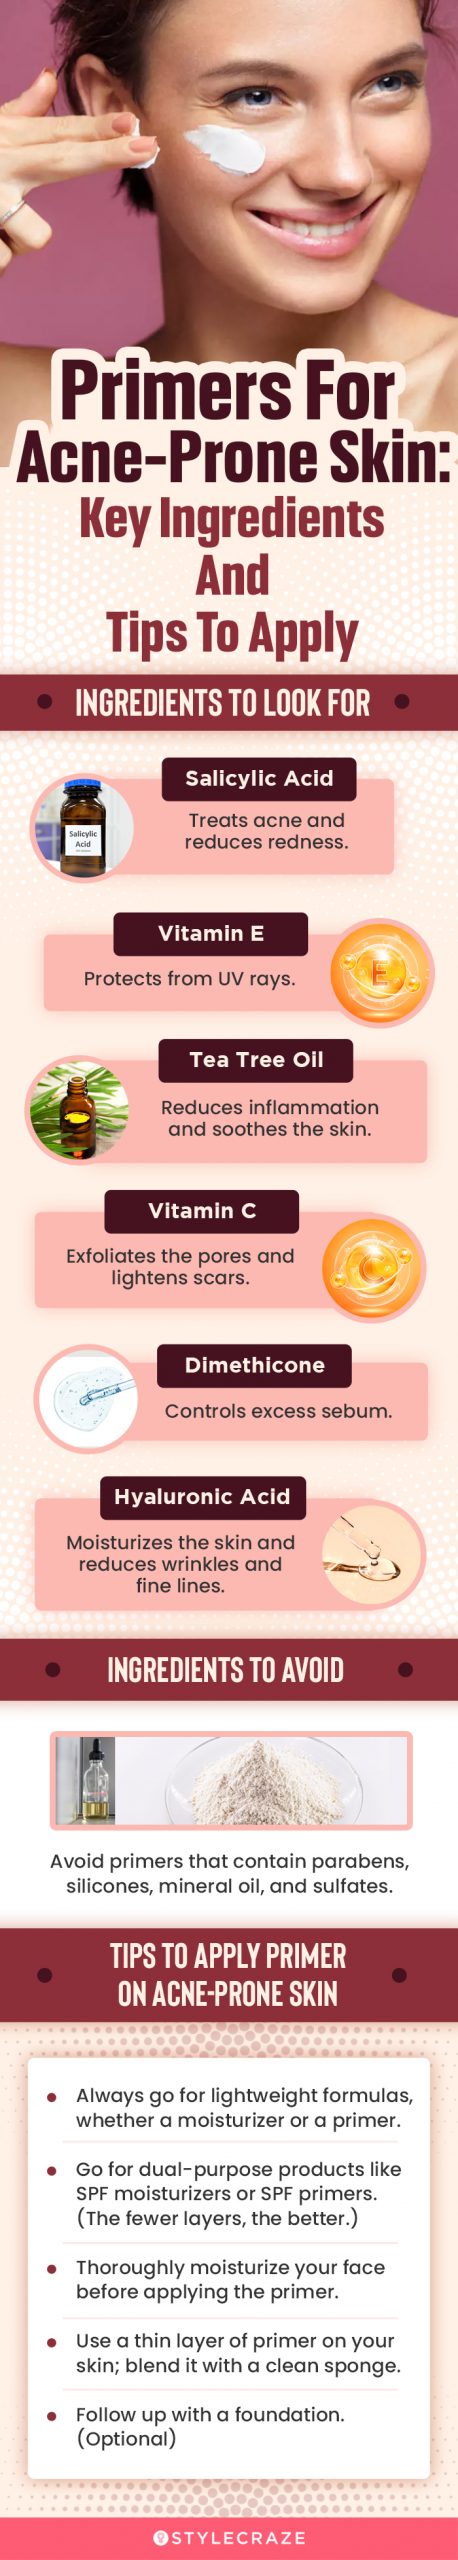 Primers For Acne–Prone Skin: Key Ingredients And How To Apply (infographic)